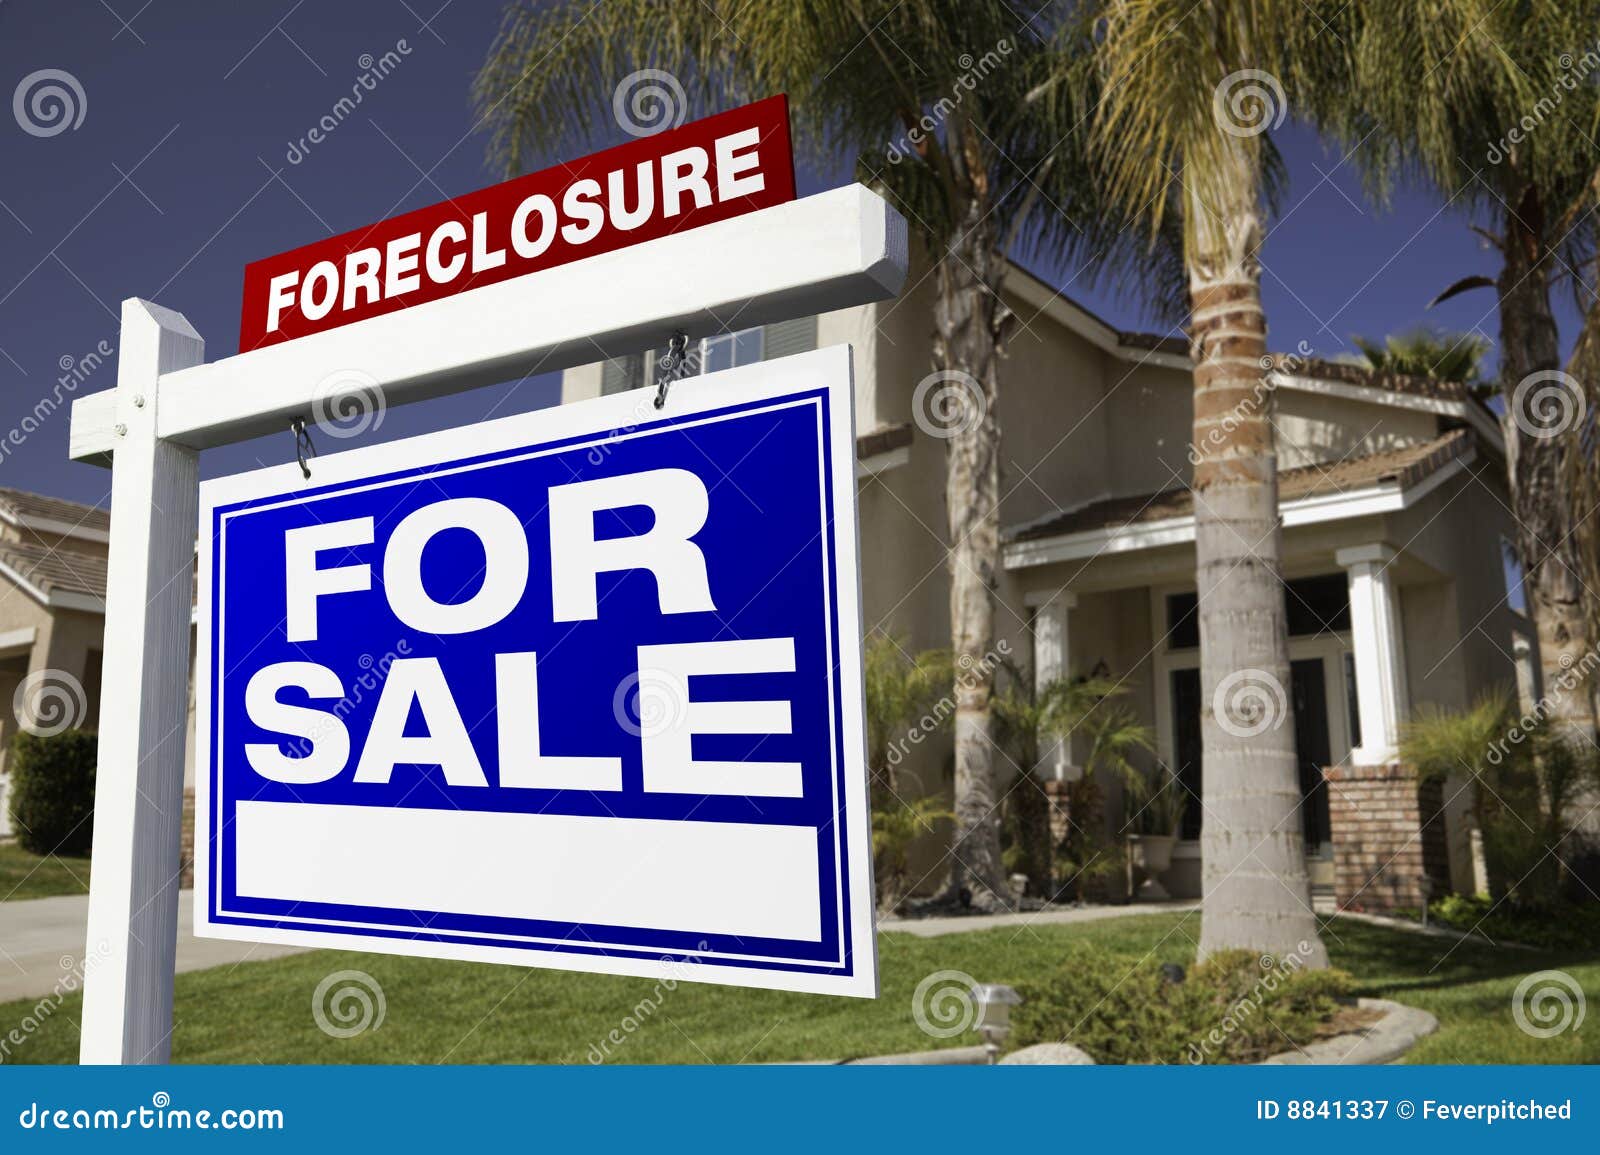 foreclosure for sale real estate sign and house